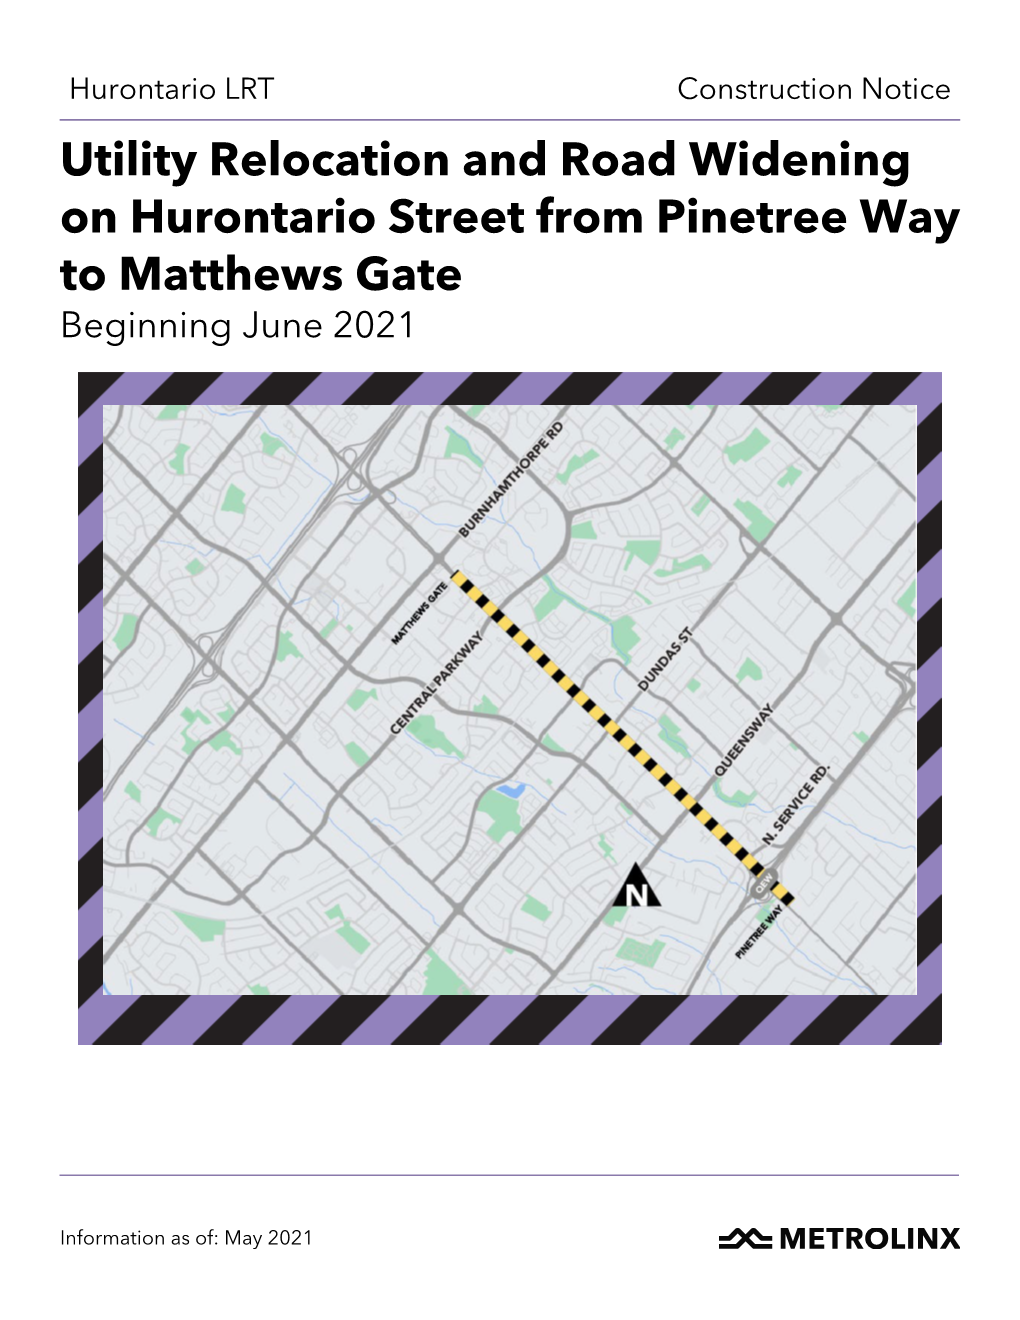 Utility Relocation and Road Widening on Hurontario Street from Pinetree Way to Matthews Gate, June 2021